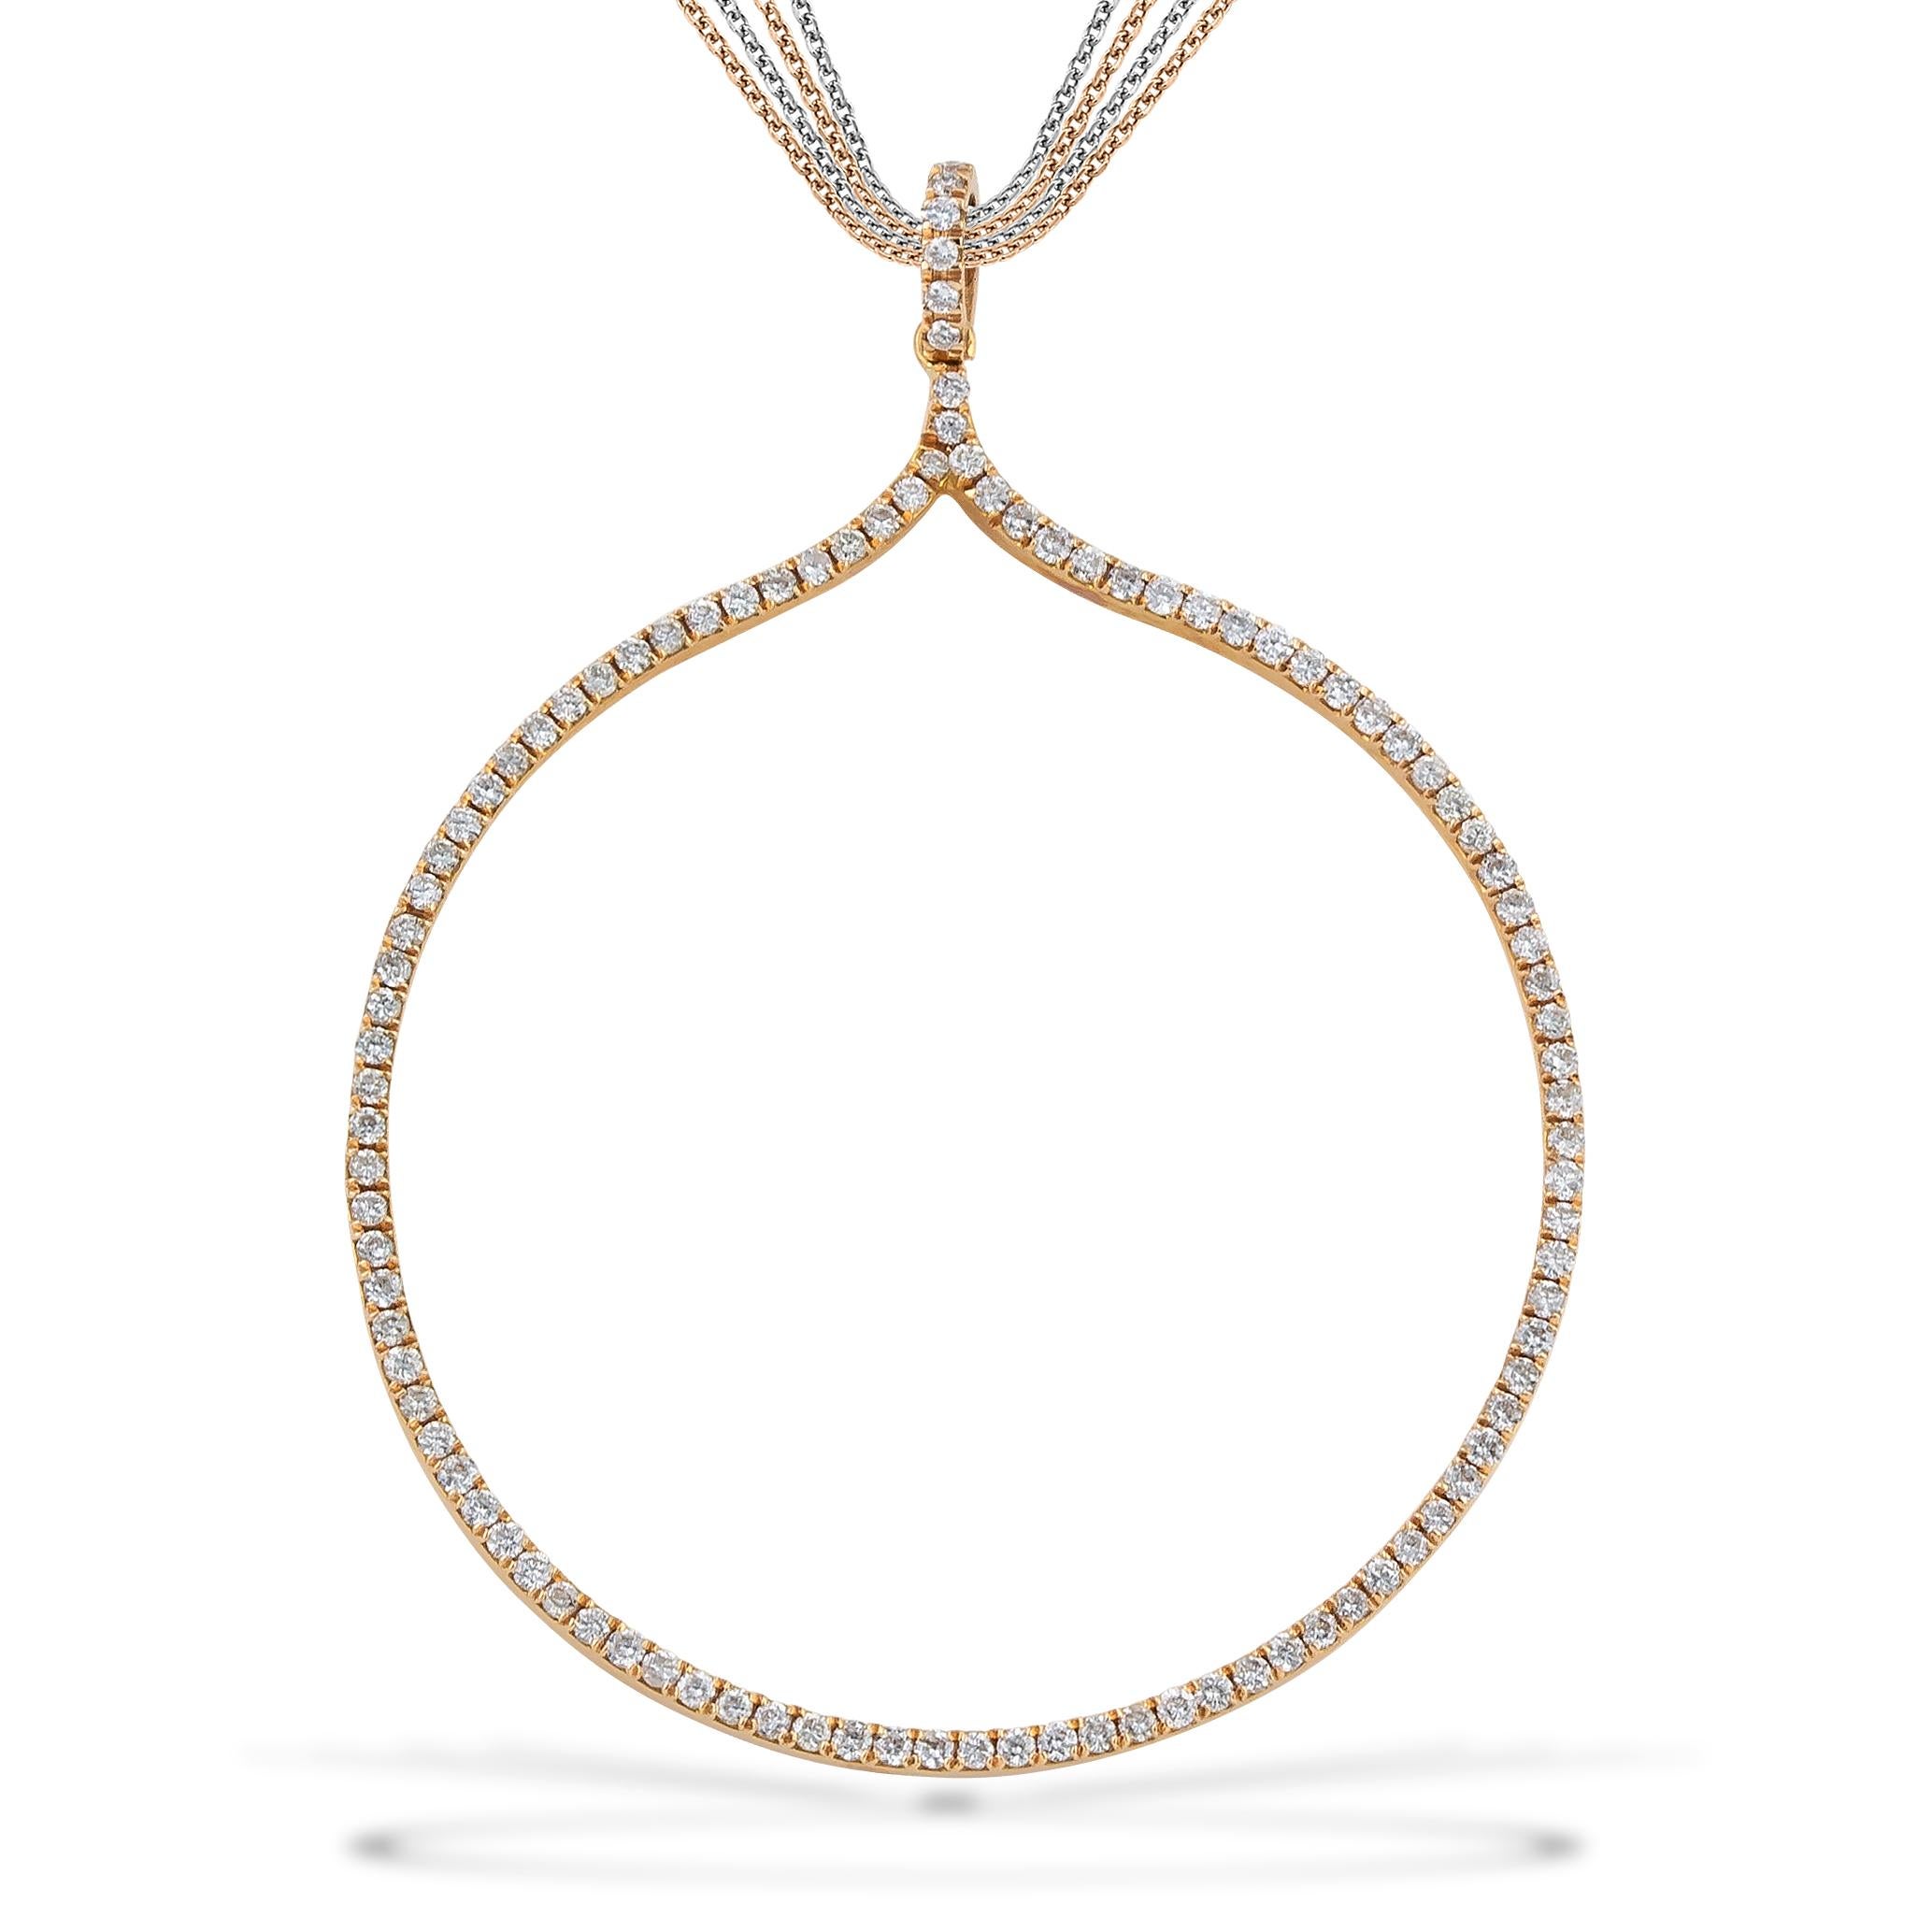 Round Hoop Diamond Pendant Necklace, in 18kt Rose Gold with Multi Chain Necklace. This Hoop Pendant - Necklace is handcrafted in 18kt Rose Gold. It comes with Multi Chain (2x rose and 2x white gold diamond cut rolo chain). This Hoop Diamond Pendant